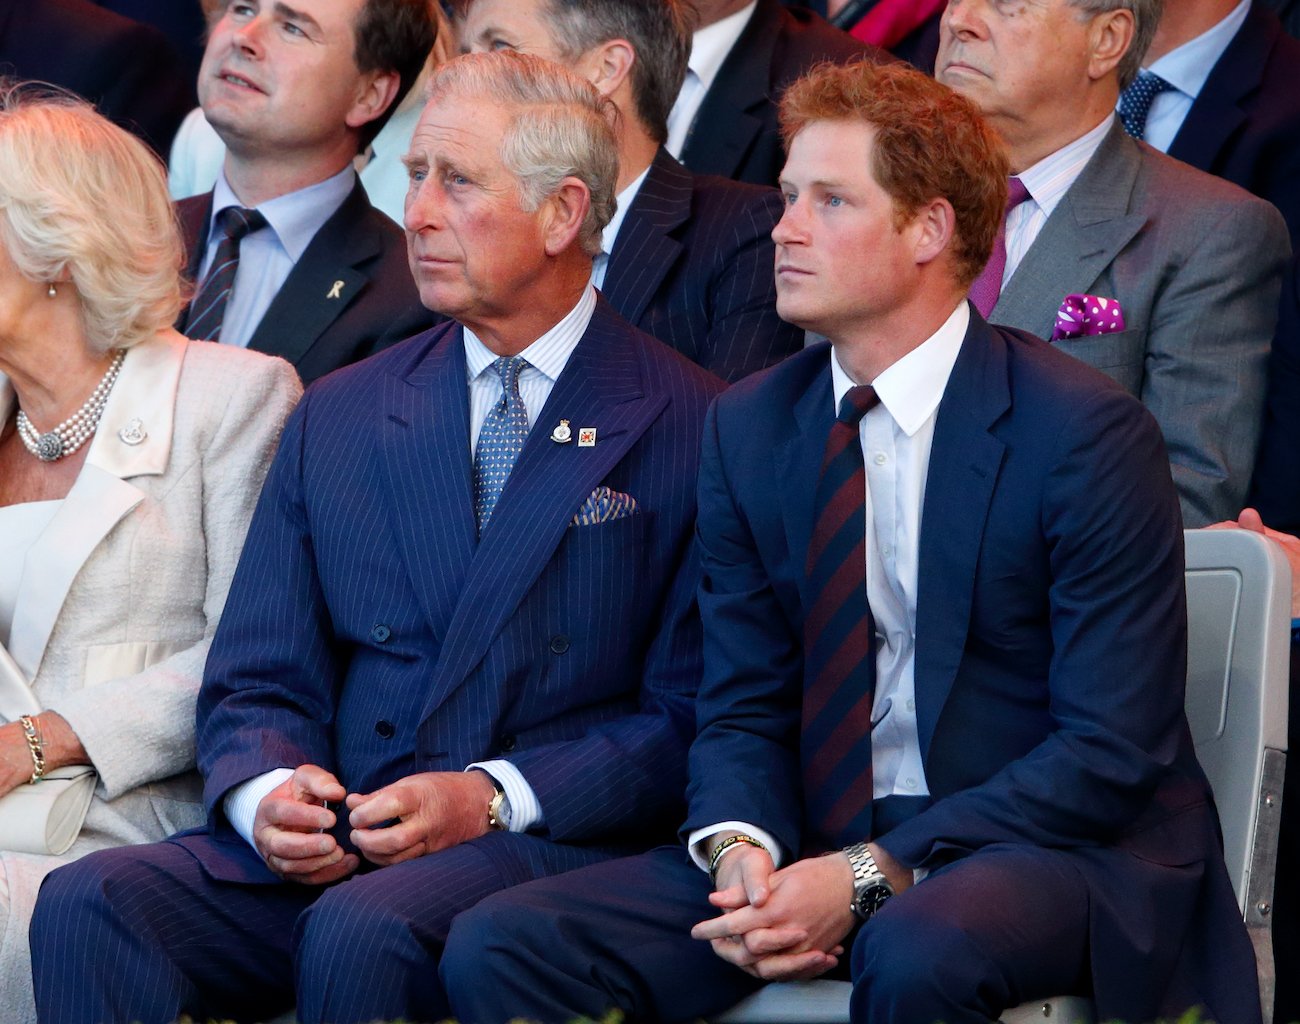 Prince Charles and Prince Harry wearing suits, sitting side by side, looking on